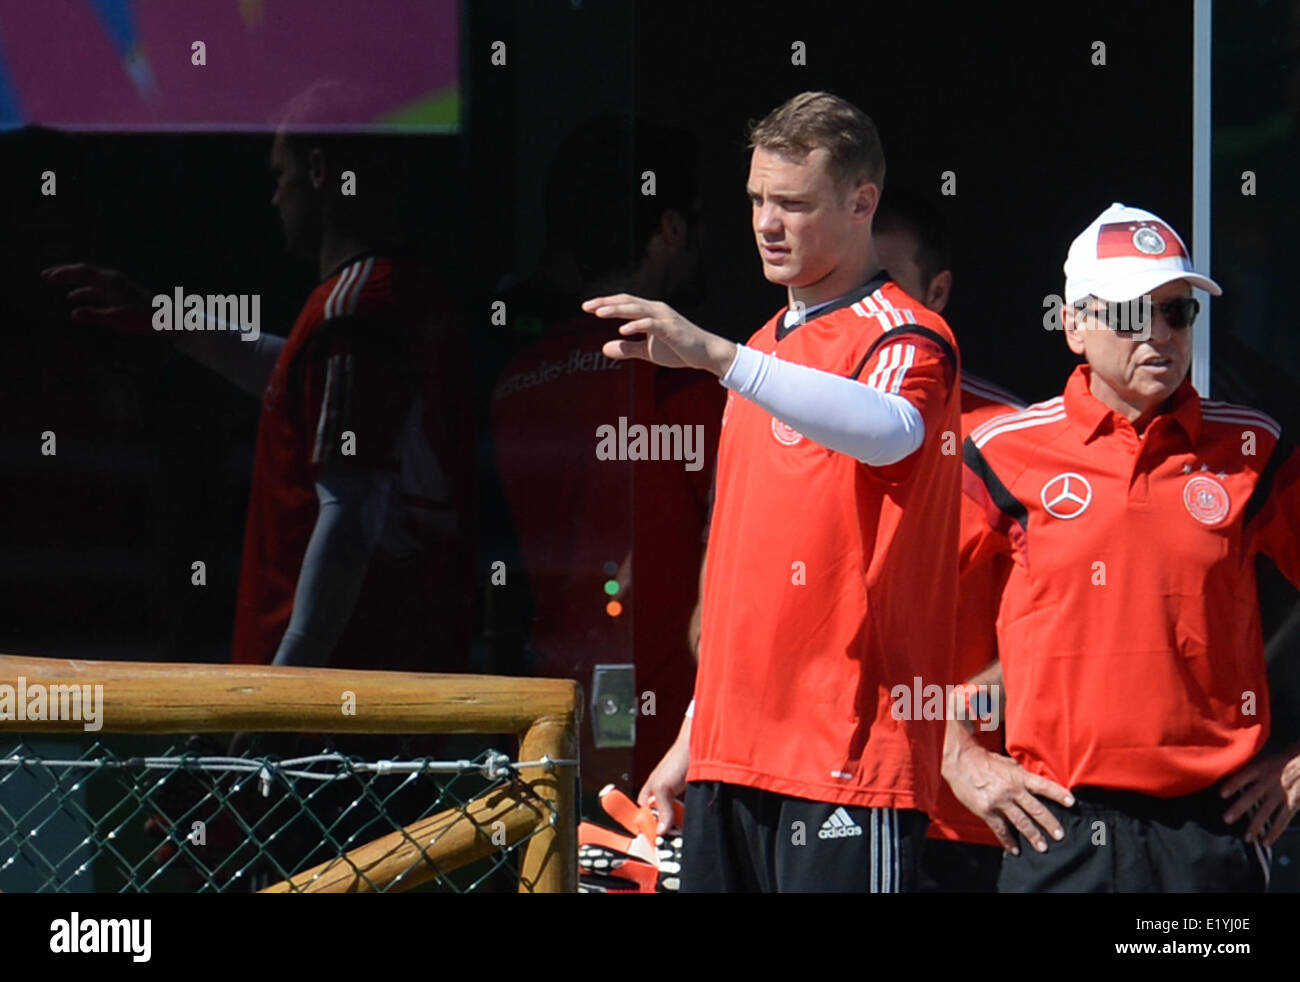 Goalkeeper Manuel Neuer (L) of the German national soccer team gestures during a training session in Santo Andre in Brazil, 11 June 2014. The FIFA World Cup 2014 will take place in Brazil from 12 June to 13 July 2014. Photo: Andreas Gebert/dpa Stock Photo